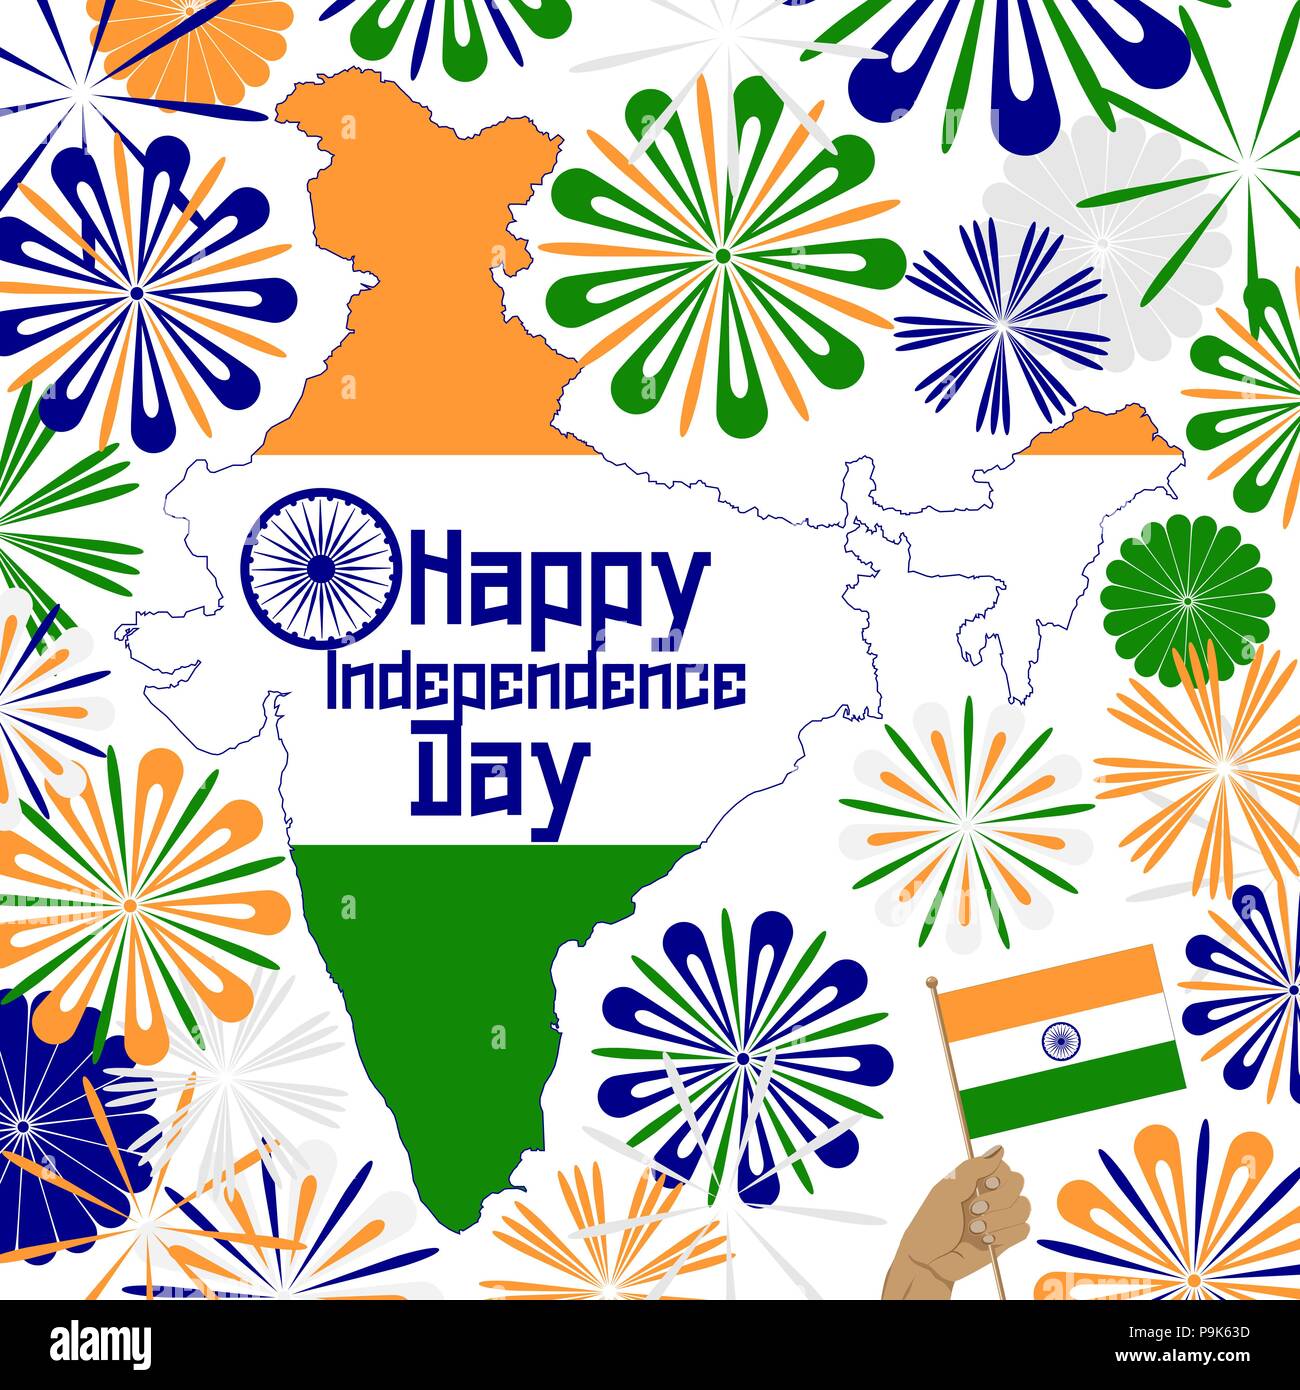 India Independence Day Chart